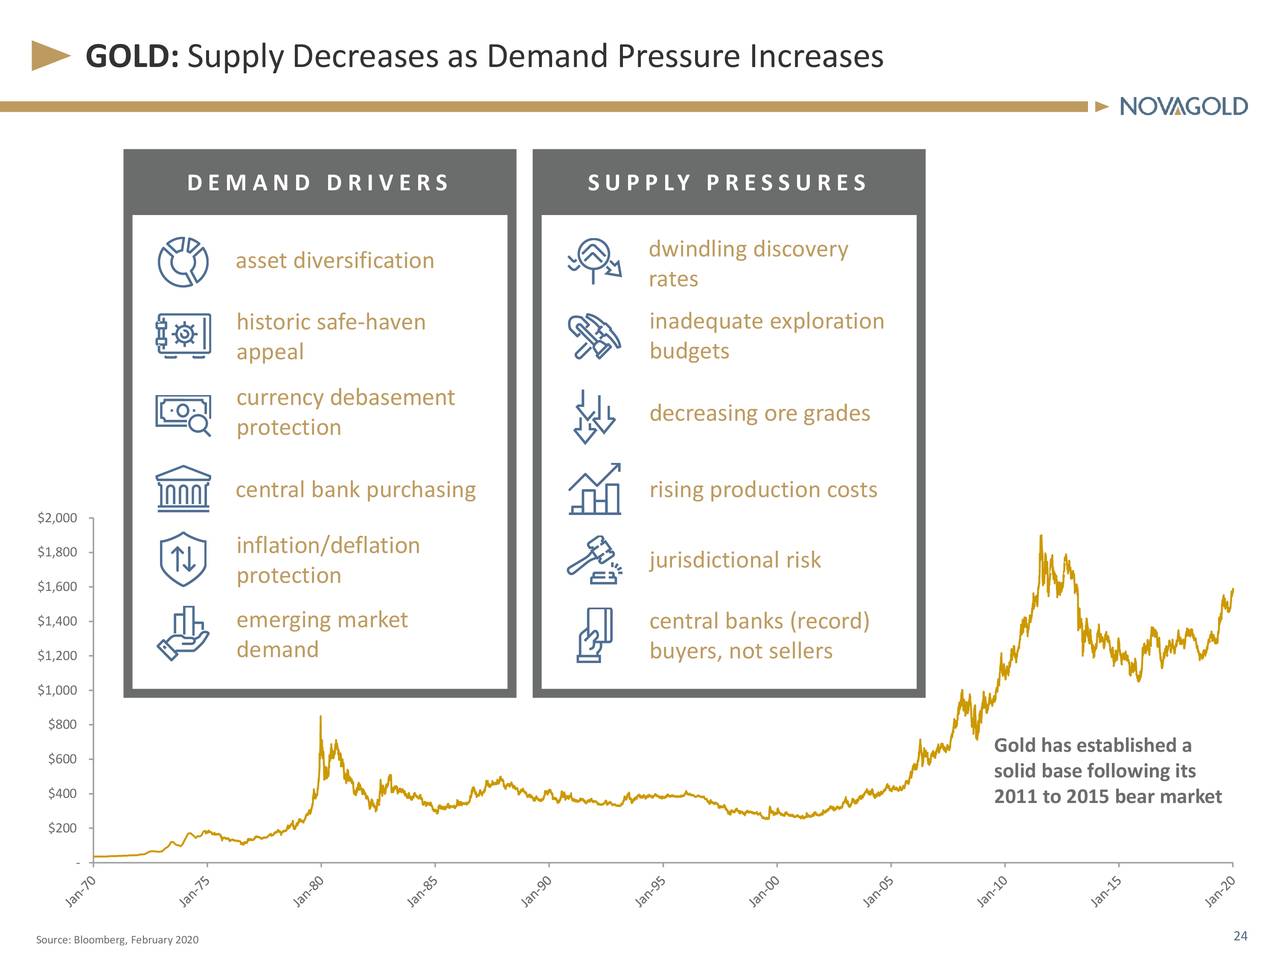 GOLD: Supply Decreases as Demand Pressure Increases